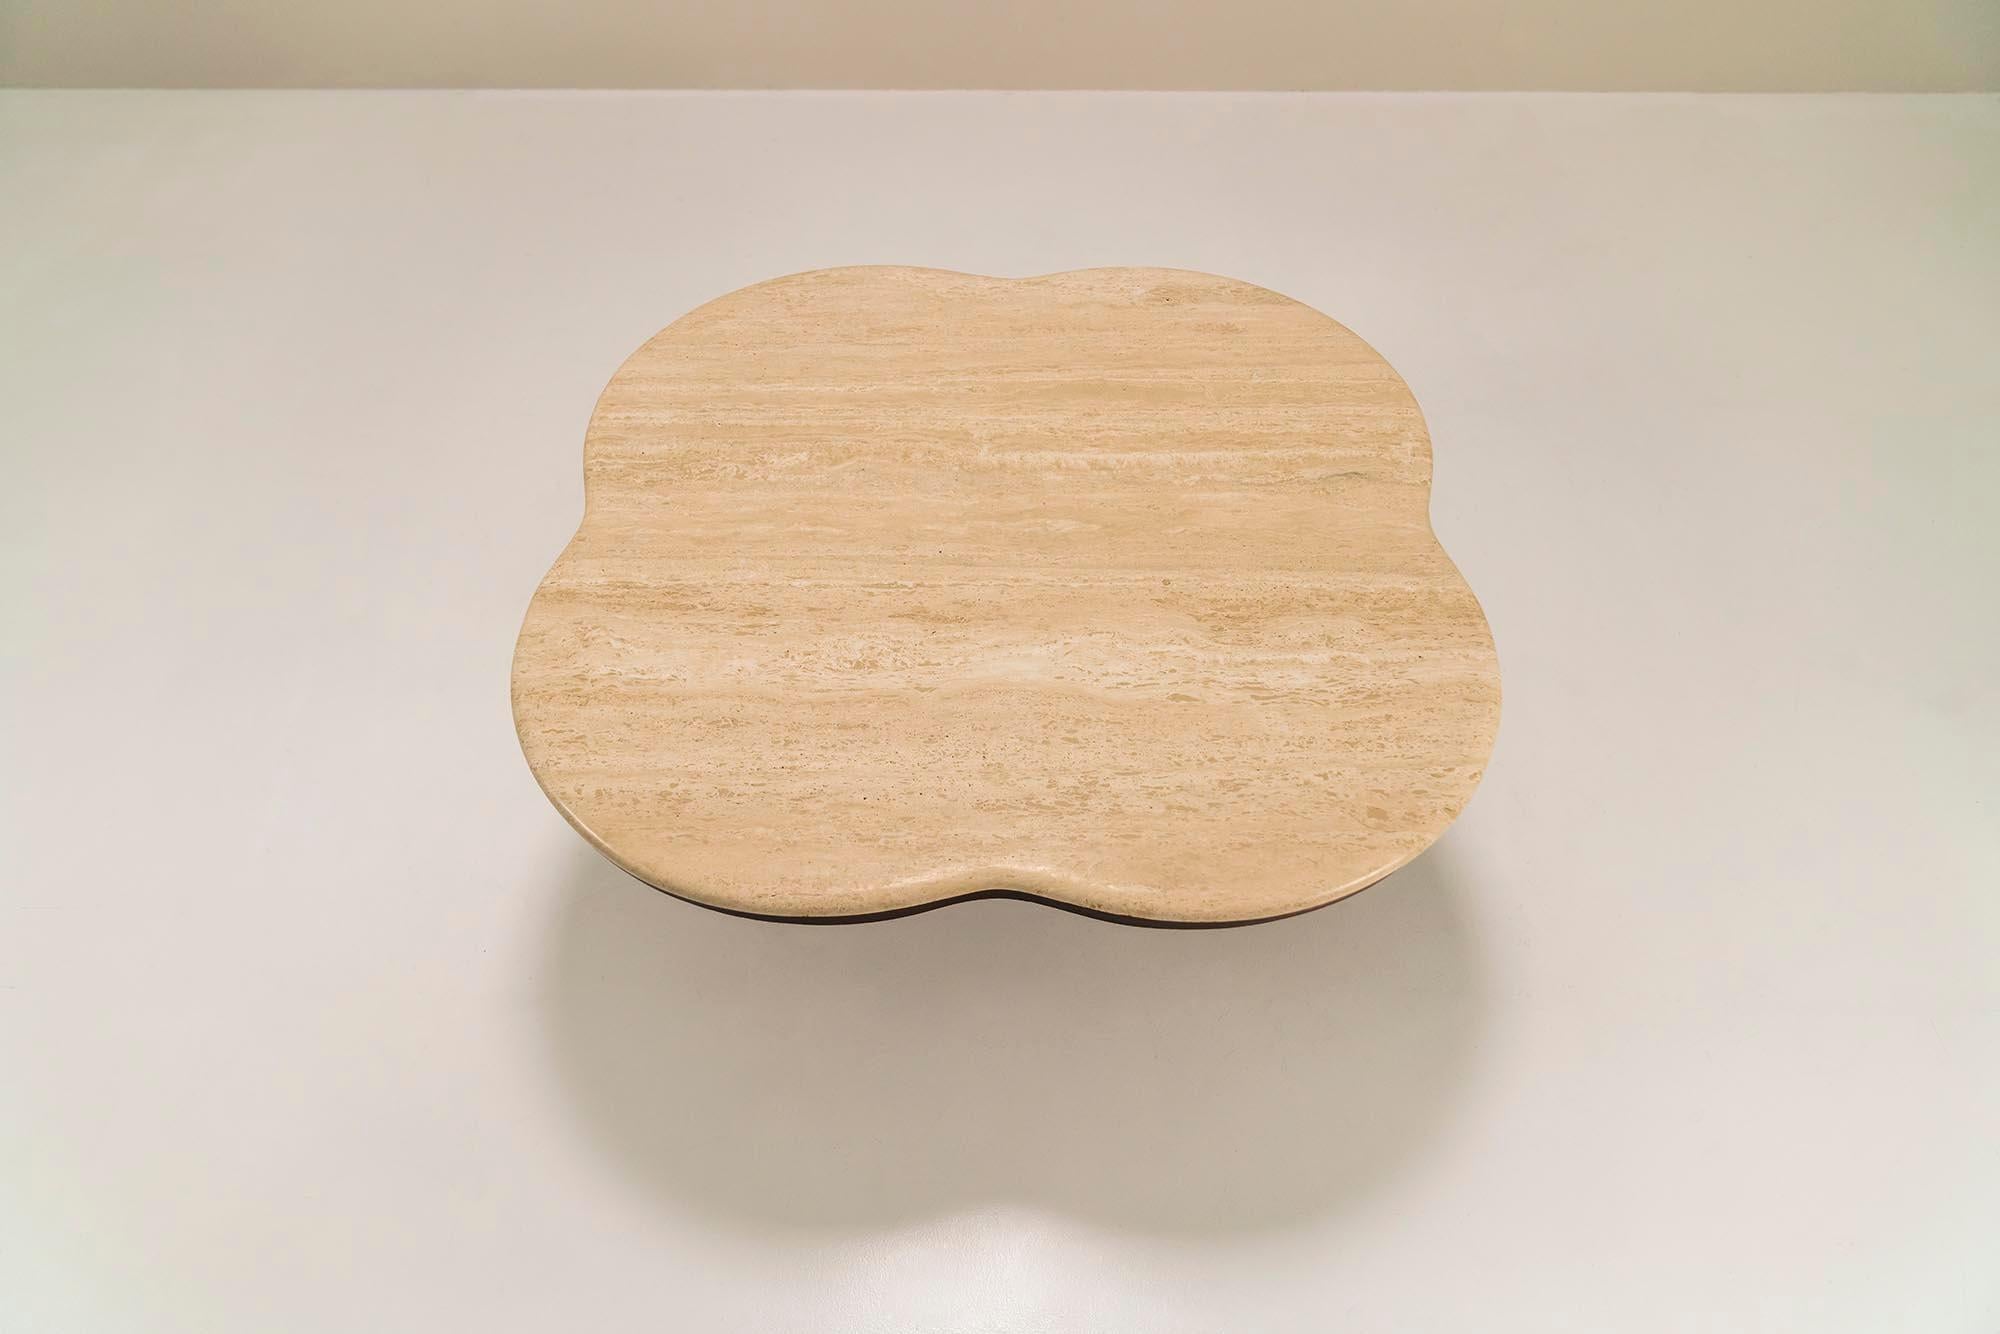 French Travertine Clover Shaped Coffee Table With Wooden Base, France 1970's.